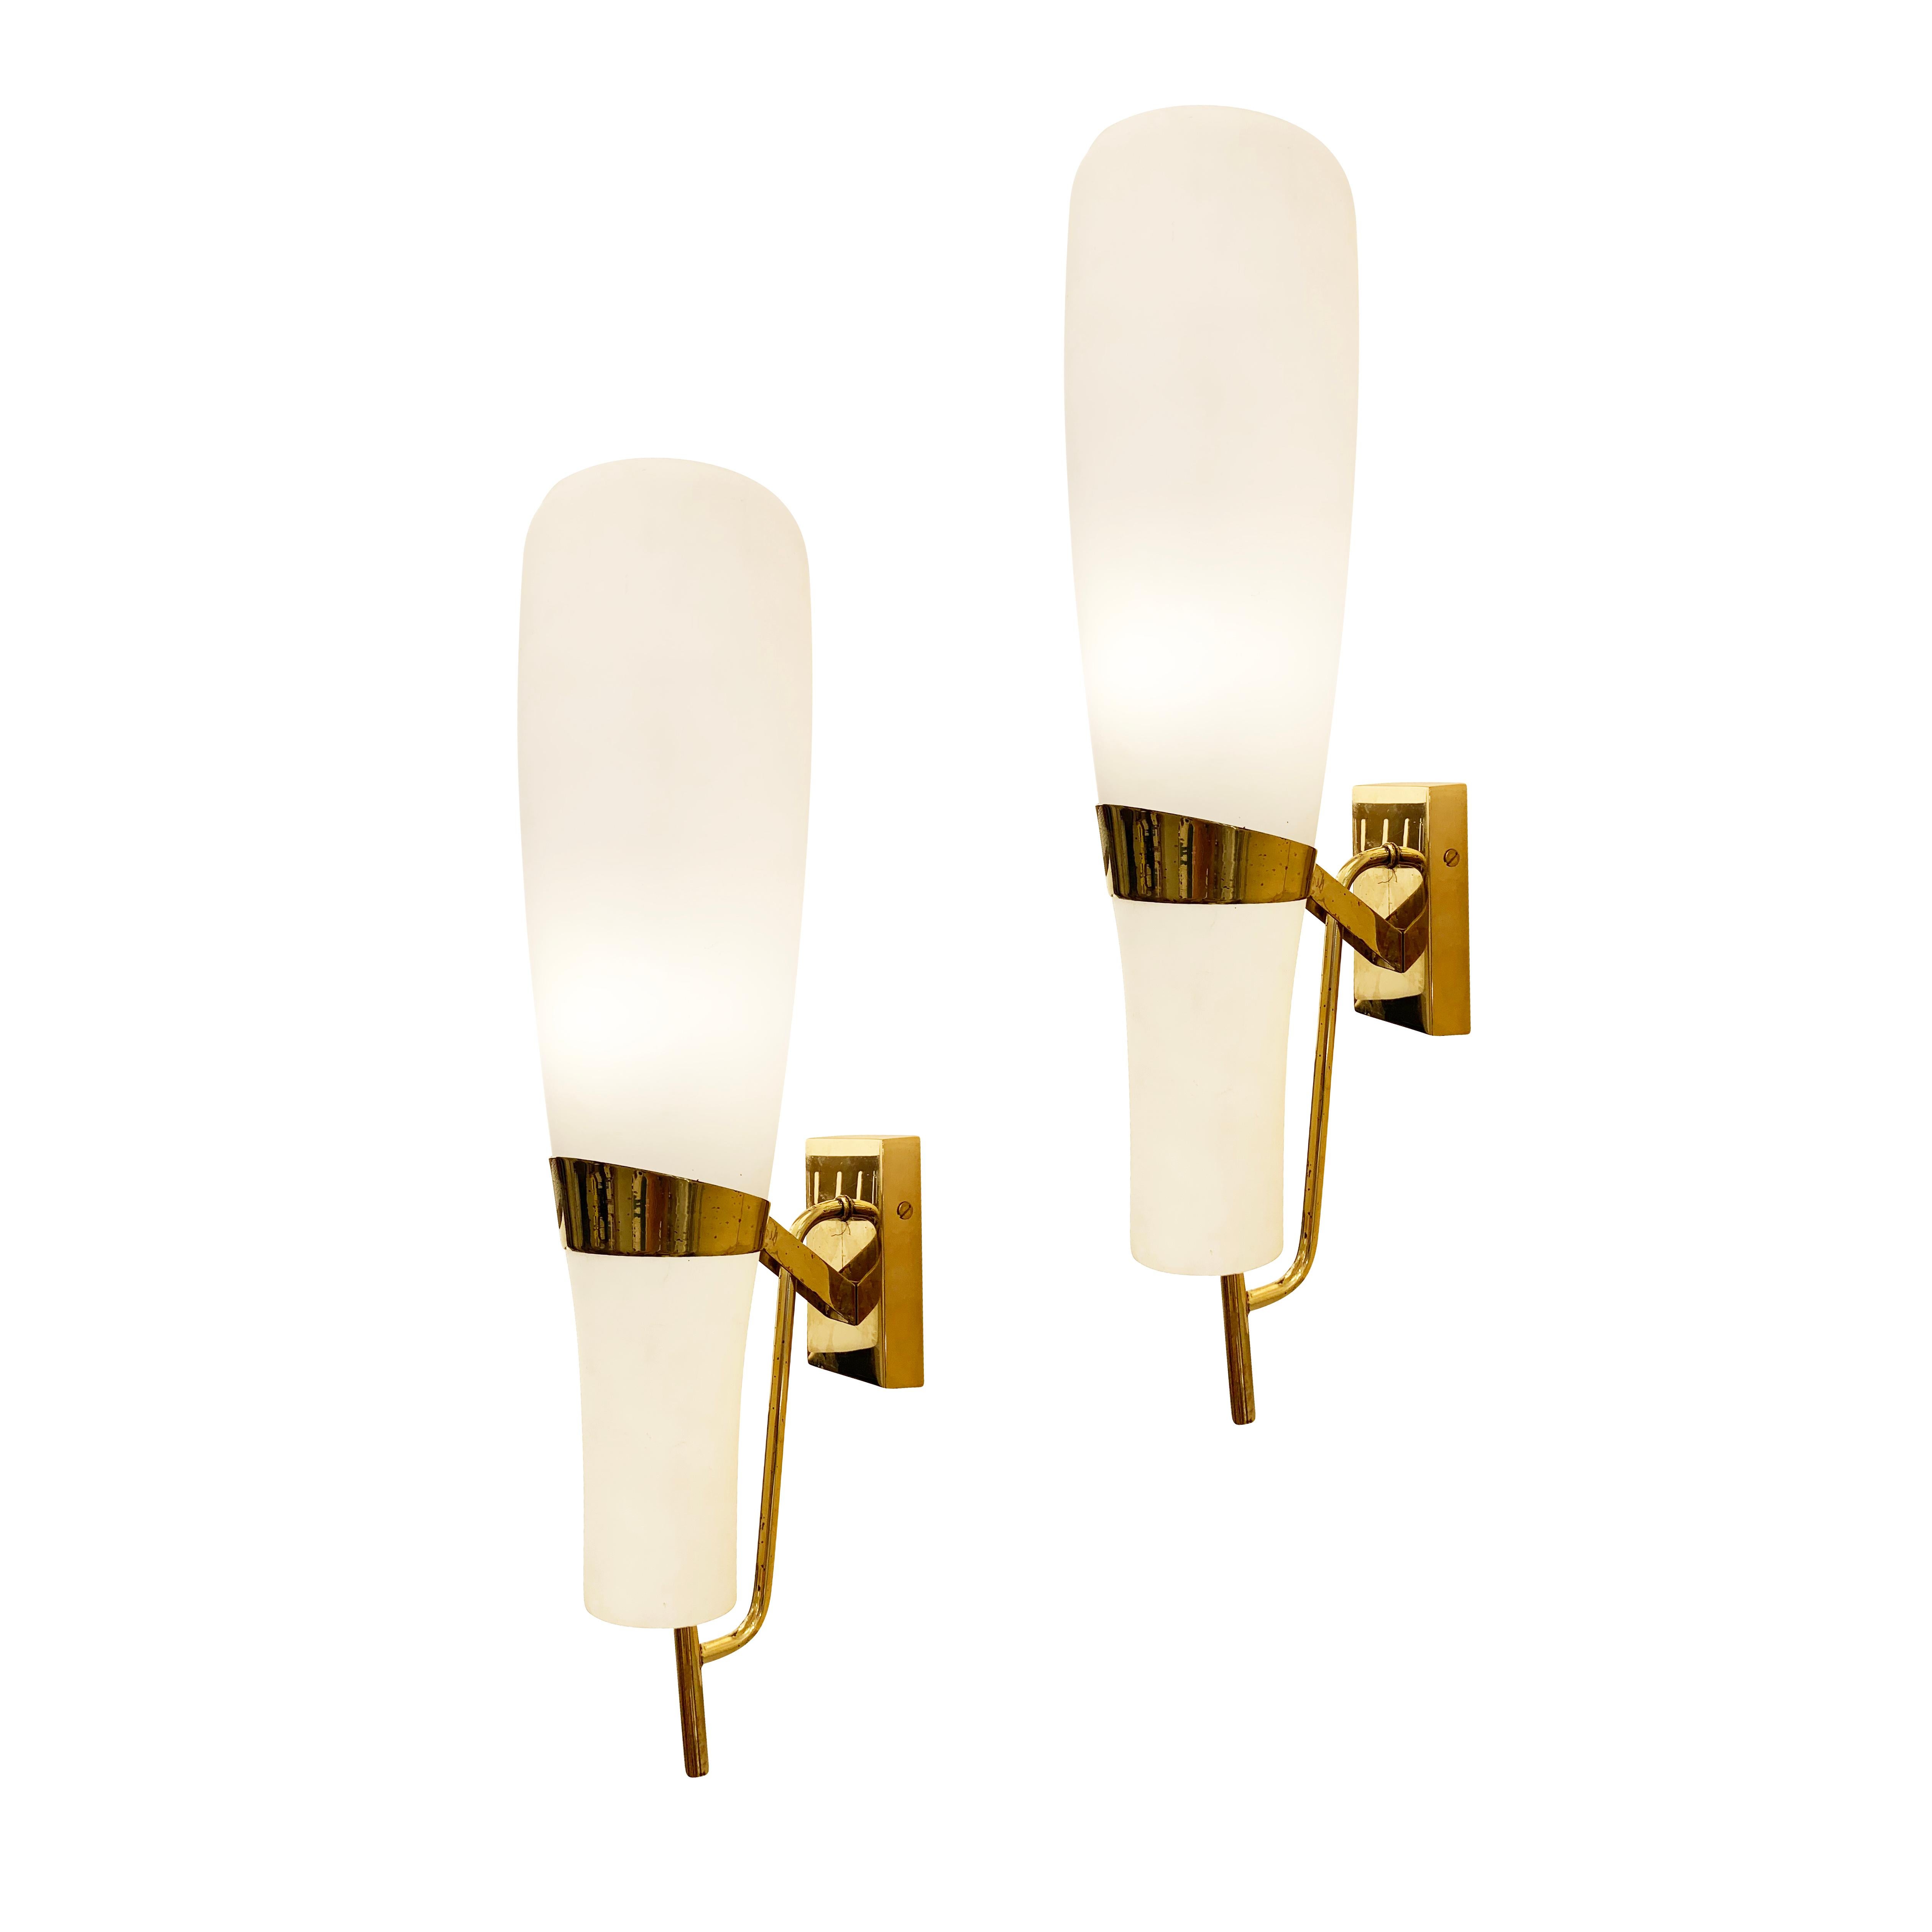 Large Italian Mid-Century sconces by Stilnovo with frosted glass shades and brass hardware. Each holds one E26 socket. Price per pair- 2 pairs available.

Condition: Excellent vintage condition, minor wear consistent with age and use.

Width: